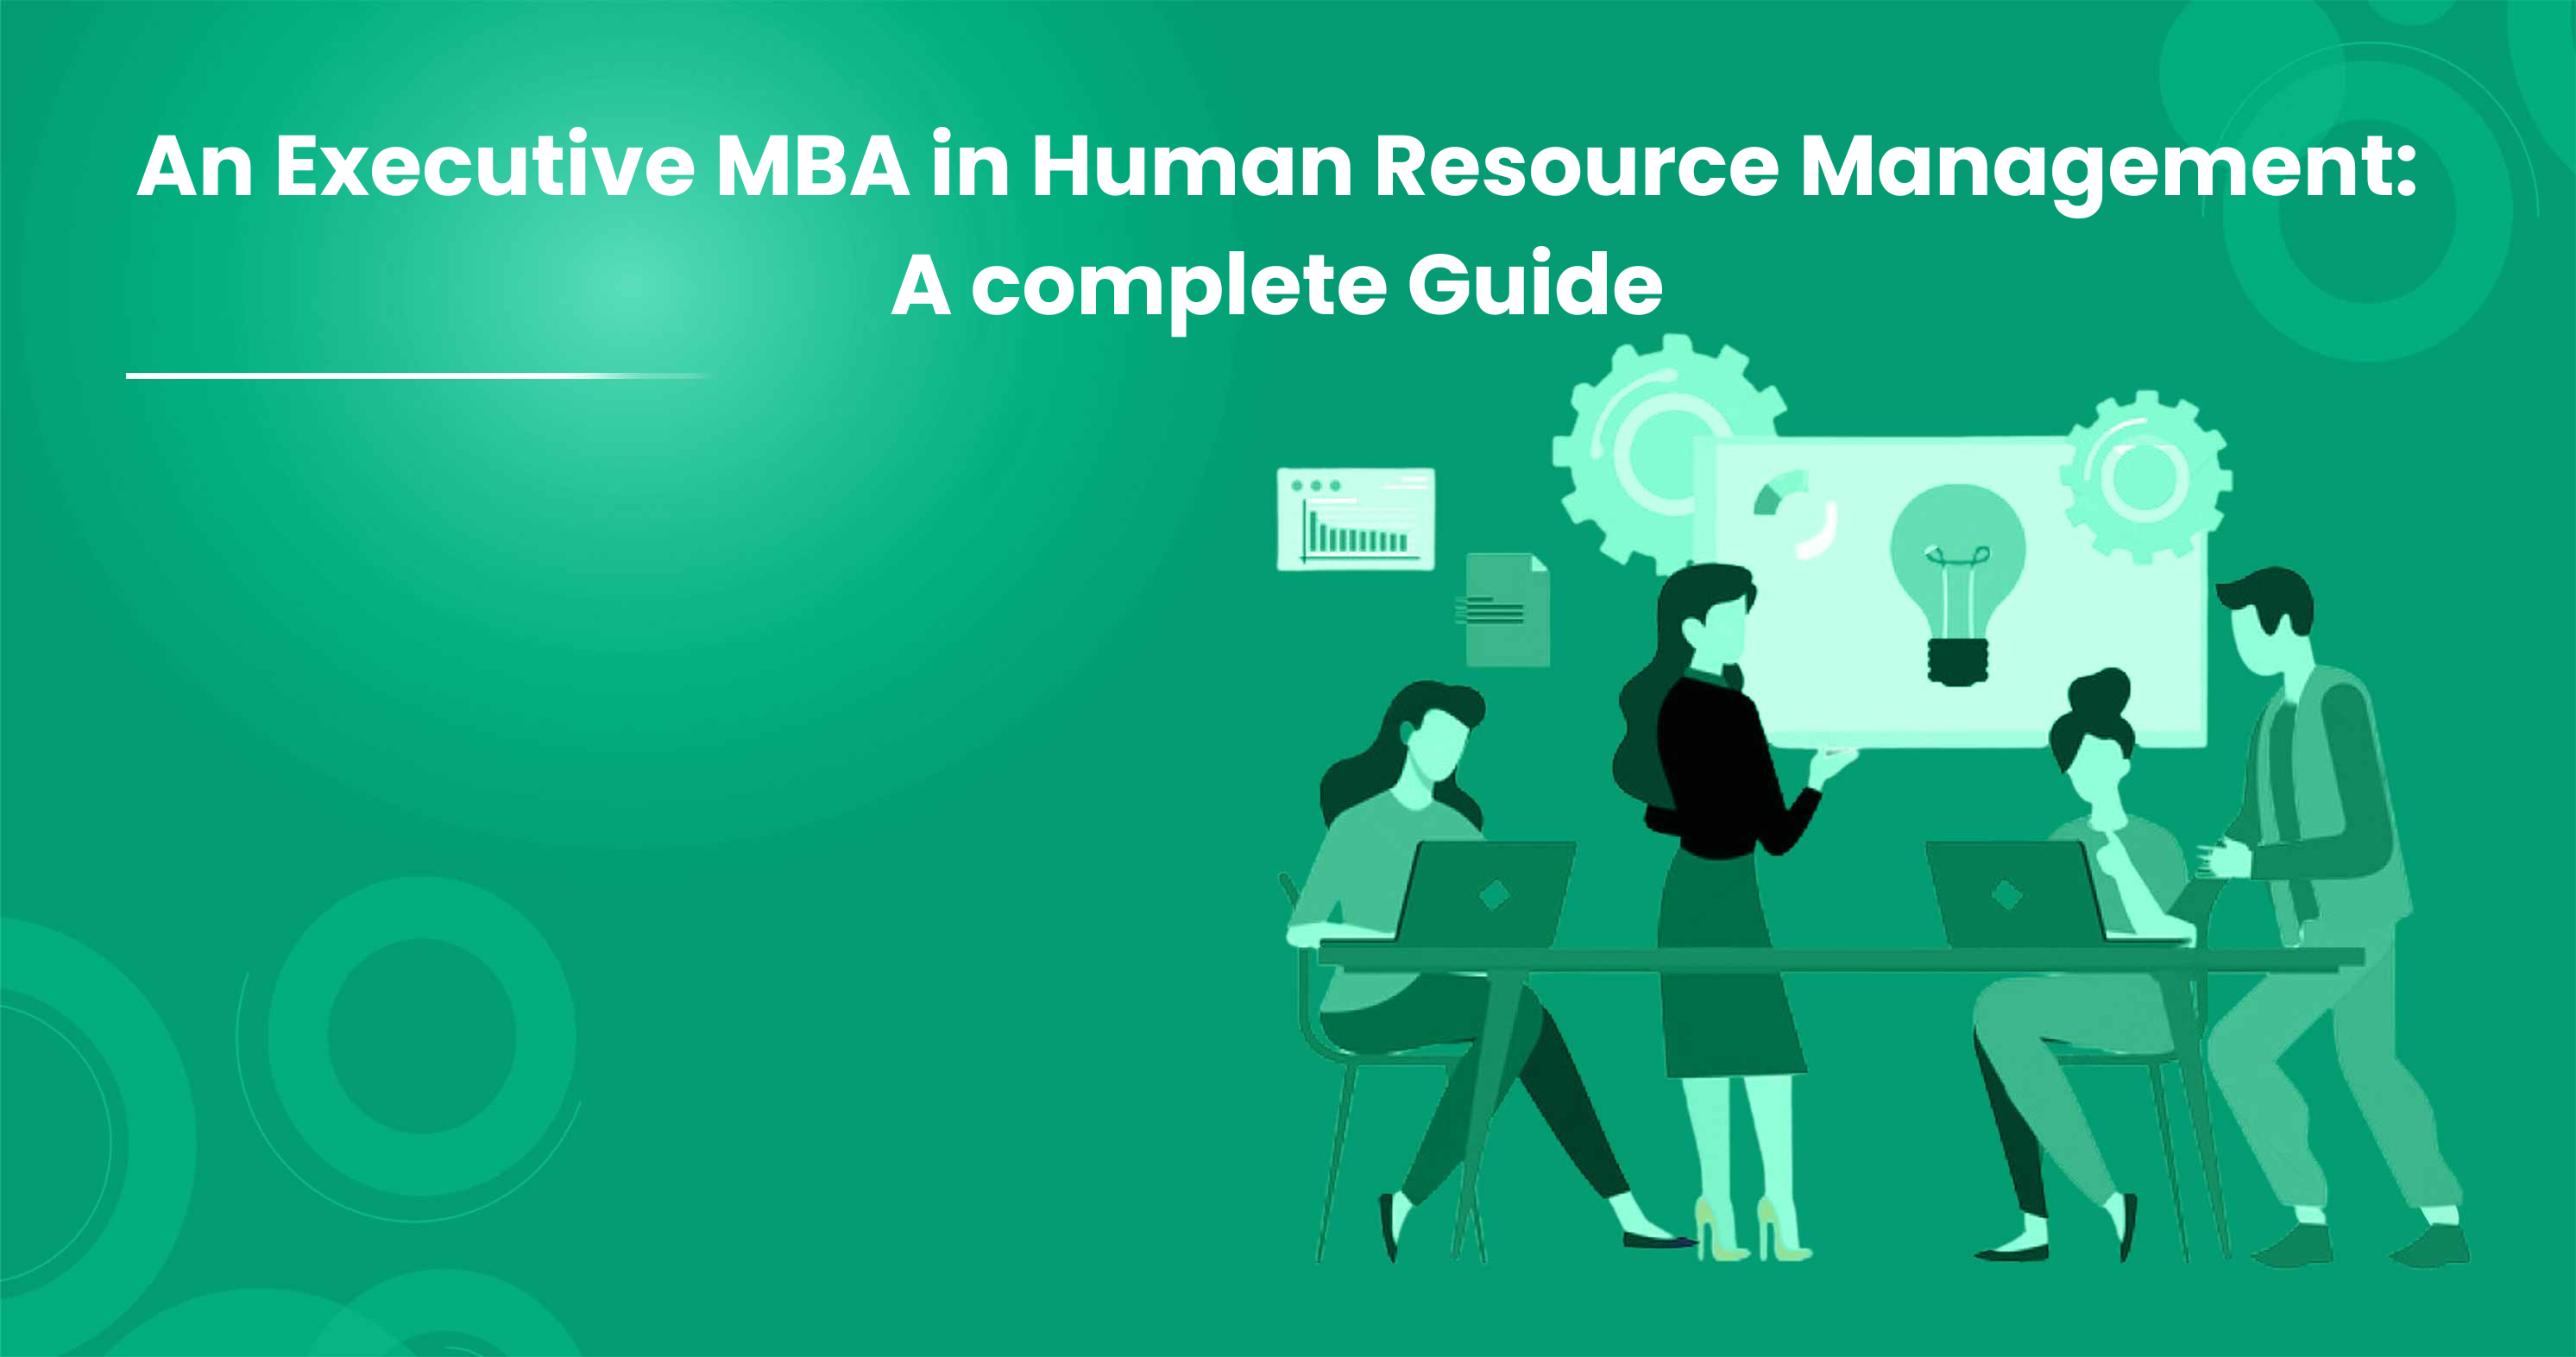 An Executive MBA in Human Resource Management: A complete Guide